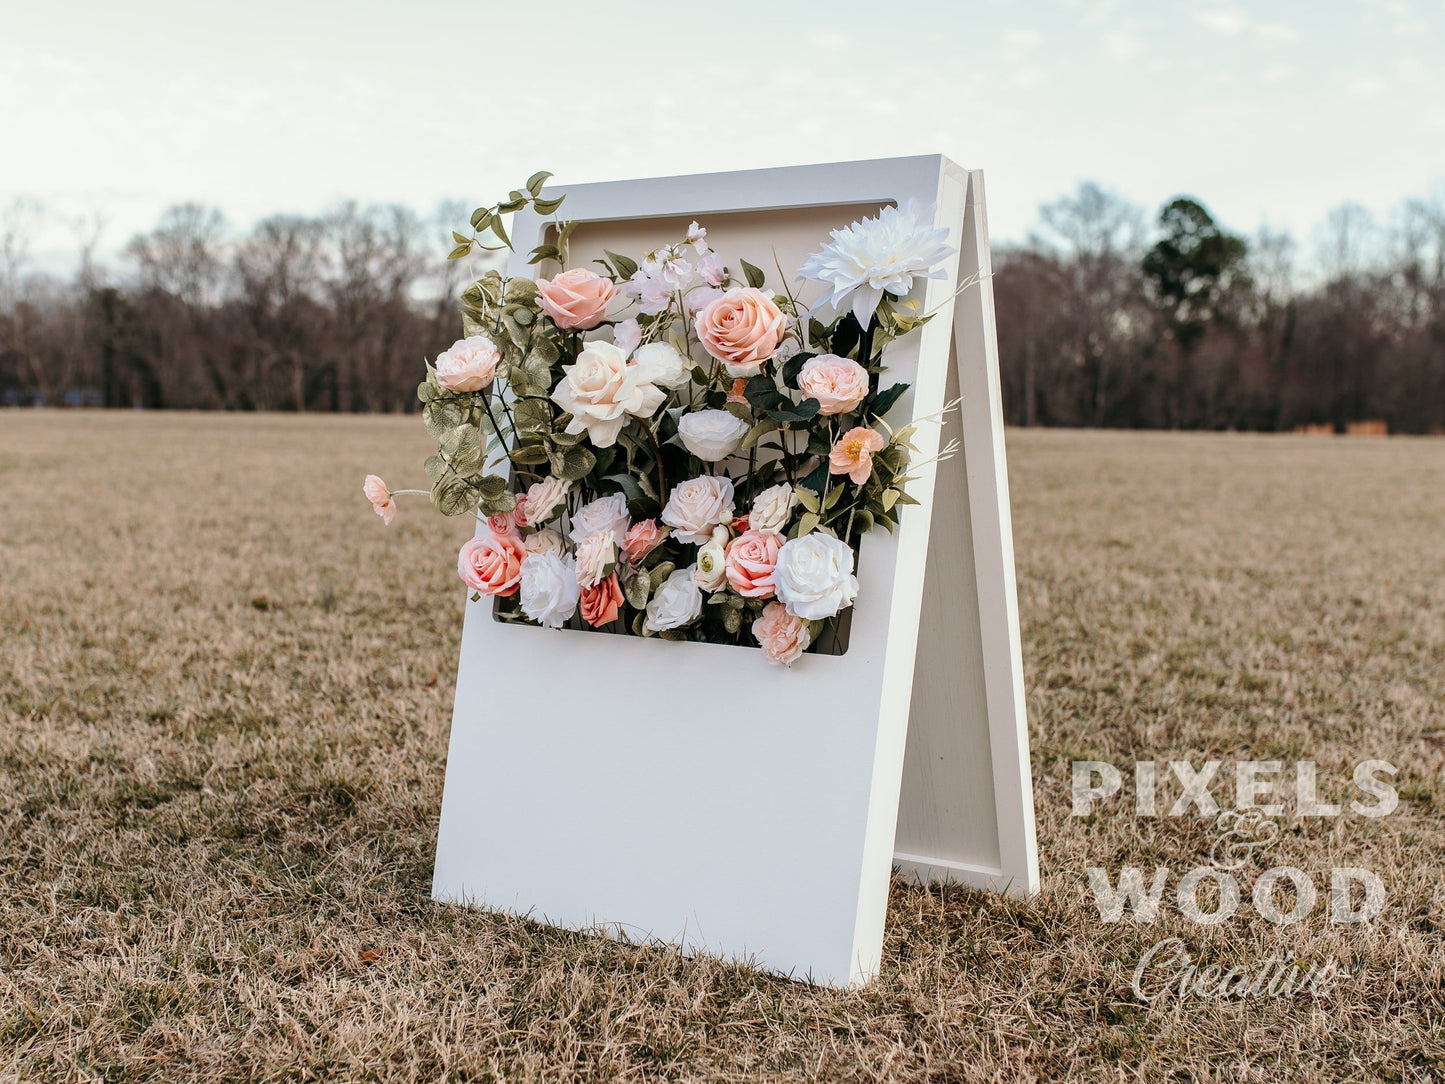 RENTAL Polaroid A-Frame Flower Box Sign - Welcome Personalized Sign - Wedding/Event